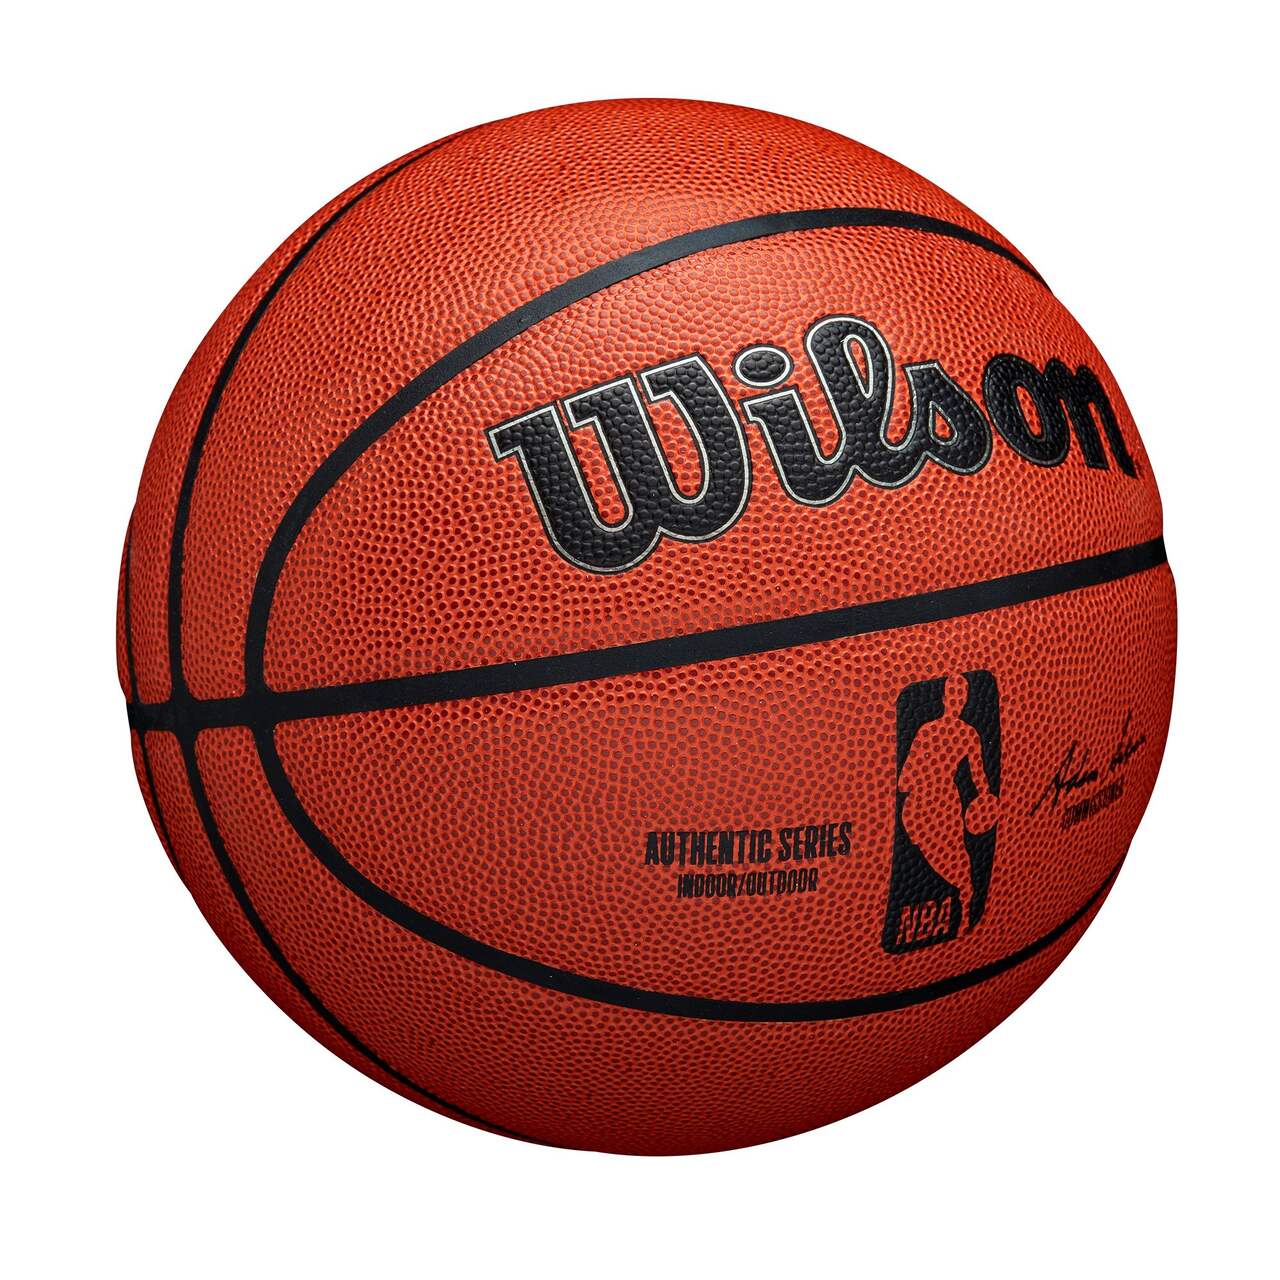 Wilson NBA Authentic Series Indoor/Outdoor Basketball, Official Size 7  (29.5-in), Brown